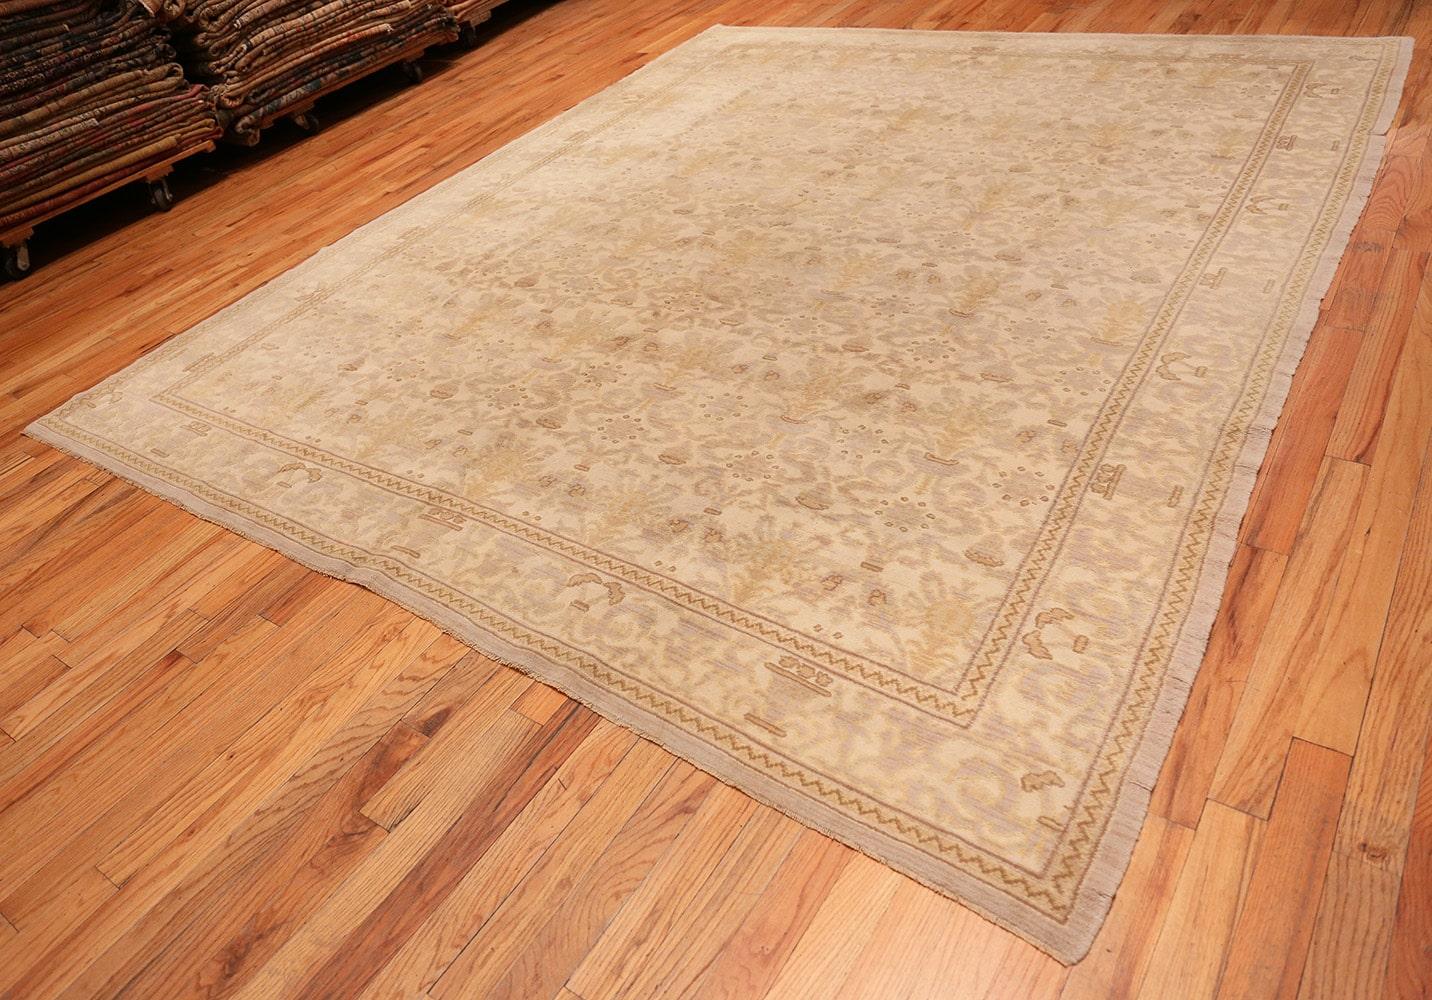 Decorative room size antique Spanish carpet, country of origin: Spain, date circa early 20th century. Size: 9 ft 3 in x 12 ft 3 in (2.82 m x 3.73 m)

The most notable feature about this antique Spanish carpet is the use of subtle sift and neutral